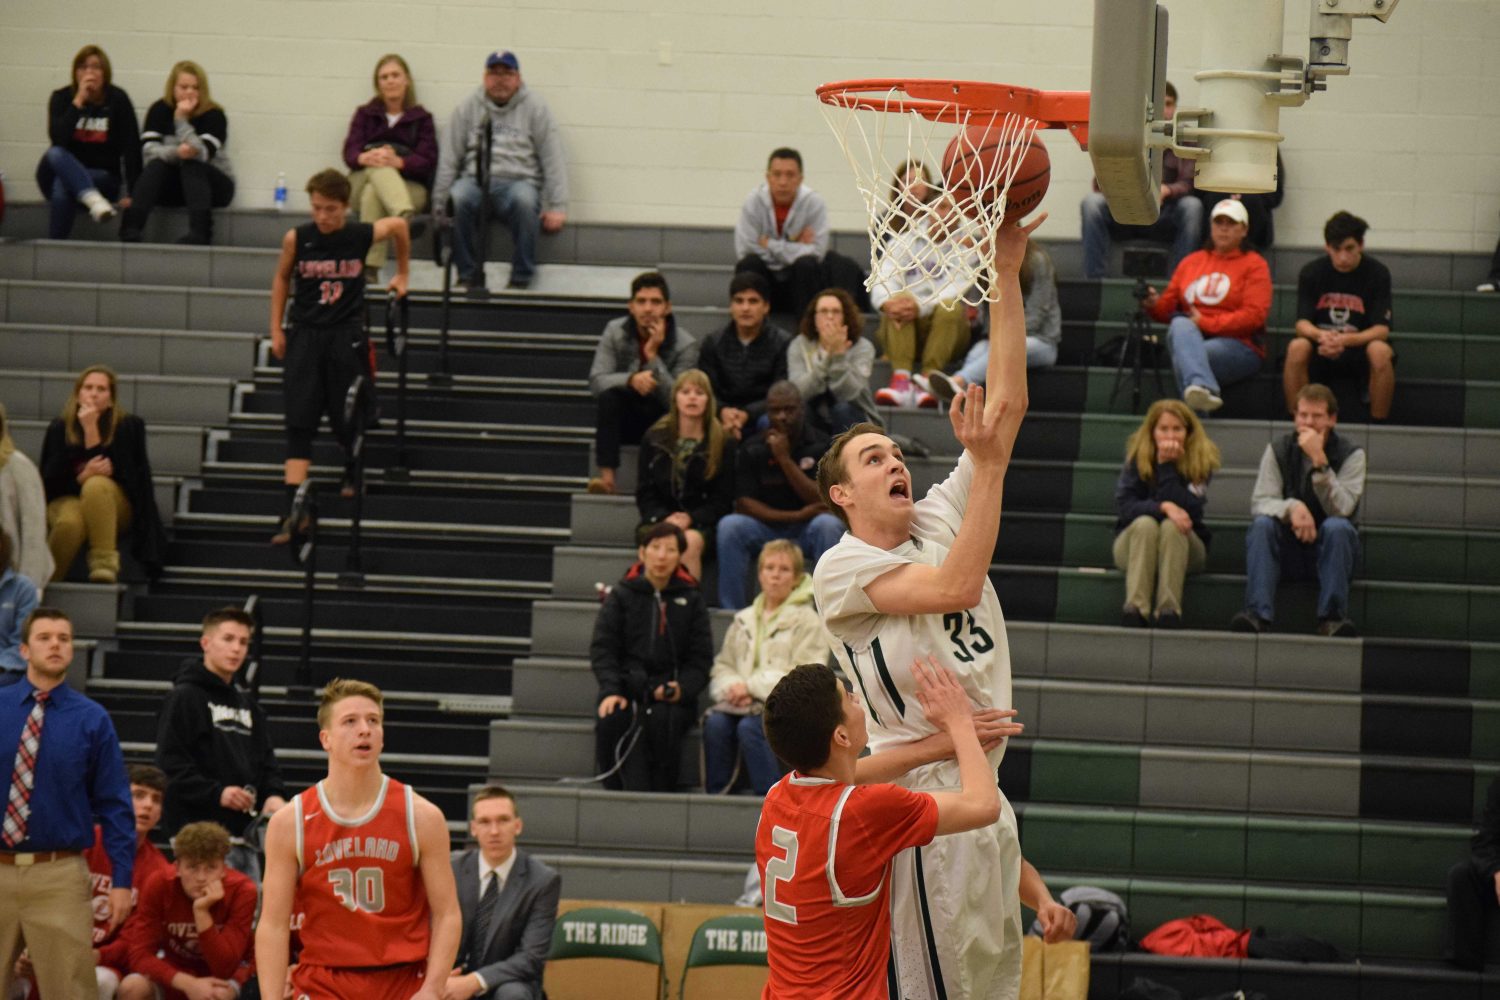 Cam DeHart jumping up for a layup against Loveland High School defender. Photo Credit: Haley Rockwell. 